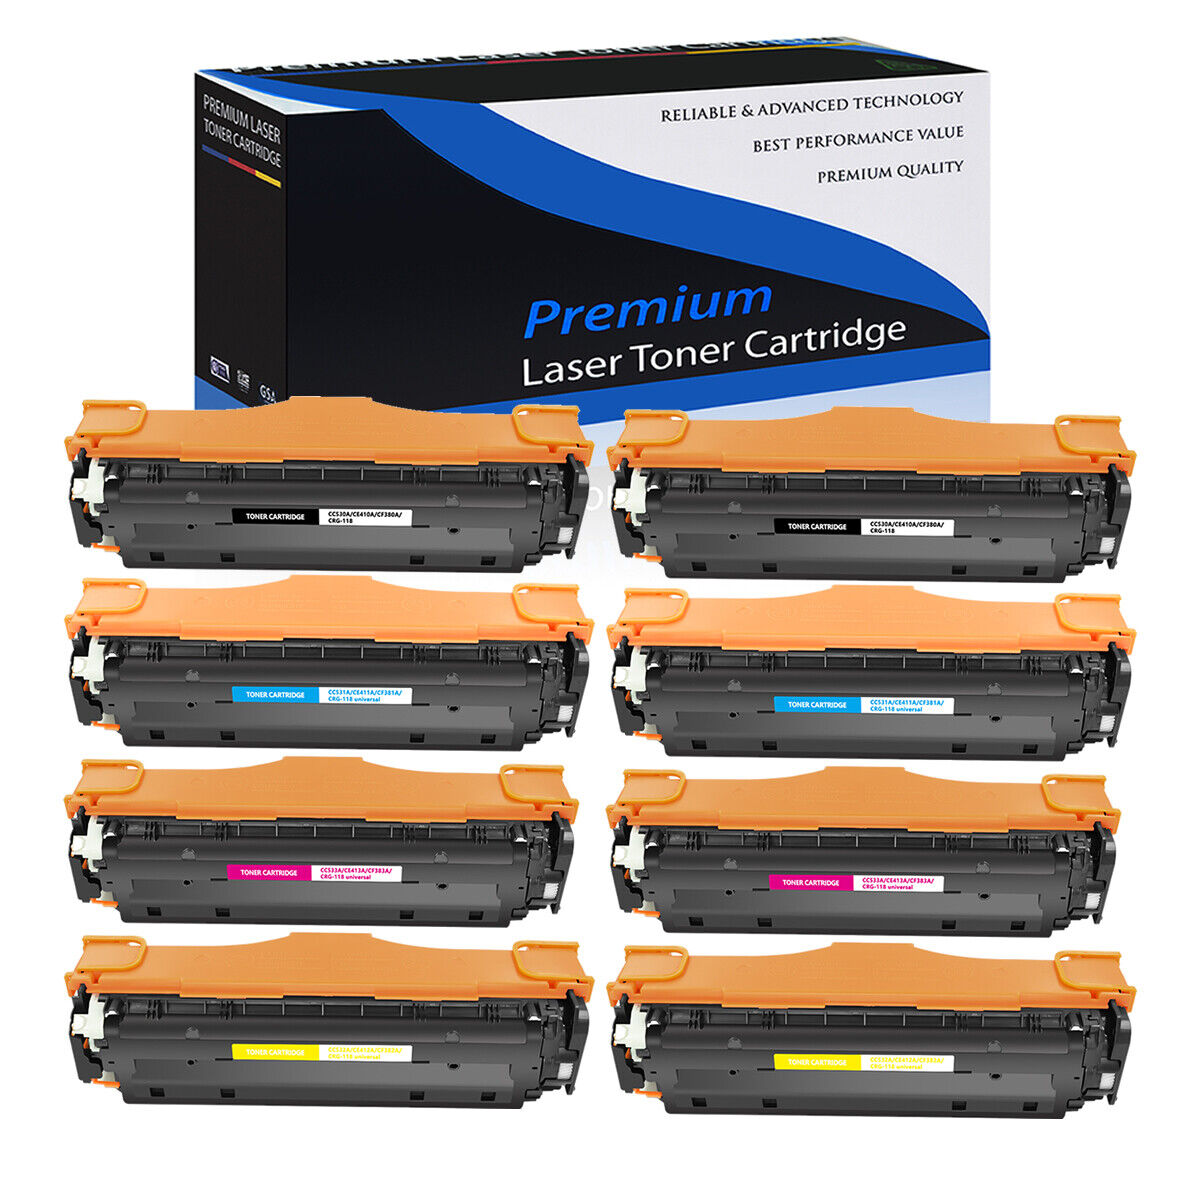 8PK CE410A CE411A CE412A CE413A Toner for HP LaserJet Pro 300 color MFP M375nw